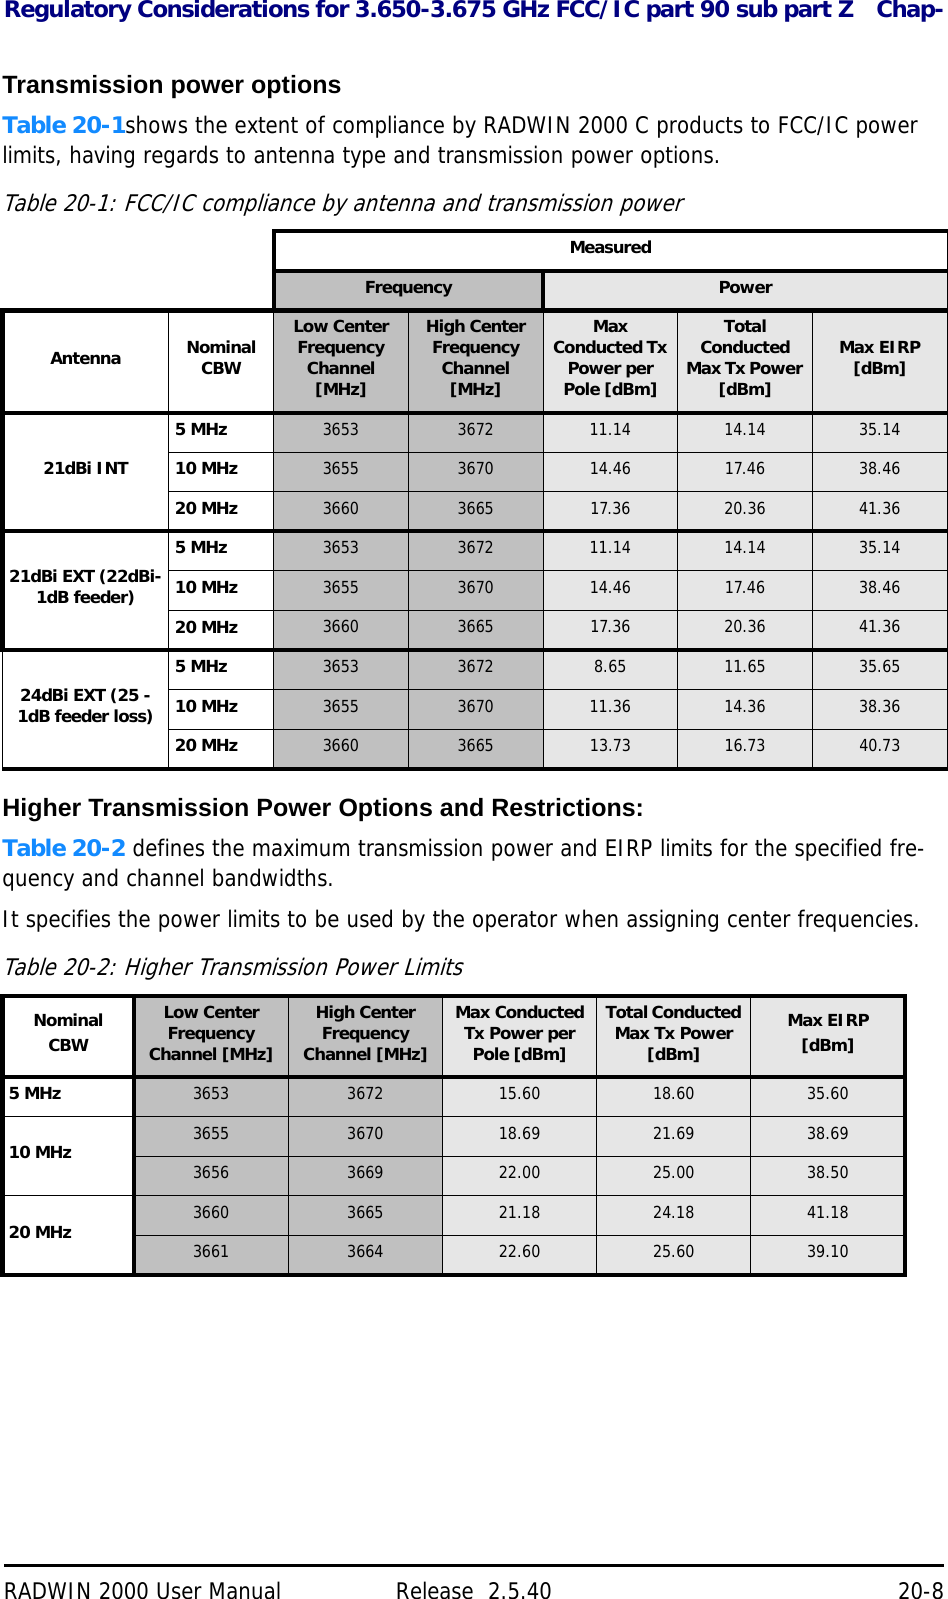 Regulatory Considerations for 3.650-3.675 GHz FCC/IC part 90 sub part Z Chap-RADWIN 2000 User Manual Release  2.5.40 20-8Transmission power optionsTable 20-1shows the extent of compliance by RADWIN 2000 C products to FCC/IC power limits, having regards to antenna type and transmission power options.Higher Transmission Power Options and Restrictions:Table 20-2 defines the maximum transmission power and EIRP limits for the specified fre-quency and channel bandwidths.It specifies the power limits to be used by the operator when assigning center frequencies.Table 20-1: FCC/IC compliance by antenna and transmission powerMeasuredFrequency PowerAntenna Nominal CBWLow Center Frequency Channel [MHz]High Center Frequency Channel [MHz]Max Conducted Tx Power per Pole [dBm]Total Conducted Max Tx Power [dBm]Max EIRP [dBm]21dBi INT5 MHz 3653 3672 11.14 14.14 35.1410 MHz 3655 3670 14.46 17.46 38.4620 MHz 3660 3665 17.36 20.36 41.3621dBi EXT (22dBi-1dB feeder)5 MHz 3653 3672 11.14 14.14 35.1410 MHz 3655 3670 14.46 17.46 38.4620 MHz 3660 3665 17.36 20.36 41.3624dBi EXT (25 -1dB feeder loss)5 MHz 3653 3672 8.65 11.65 35.6510 MHz 3655 3670 11.36 14.36 38.3620 MHz 3660 3665 13.73 16.73 40.73Table 20-2: Higher Transmission Power LimitsNominalCBWLow Center Frequency Channel [MHz]High Center Frequency Channel [MHz]Max Conducted Tx Power per Pole [dBm]Total Conducted Max Tx Power [dBm]Max EIRP[dBm]5 MHz 3653 3672 15.60 18.60 35.6010 MHz 3655 3670 18.69 21.69 38.693656 3669 22.00 25.00 38.5020 MHz 3660 3665 21.18 24.18 41.183661 3664 22.60 25.60 39.10